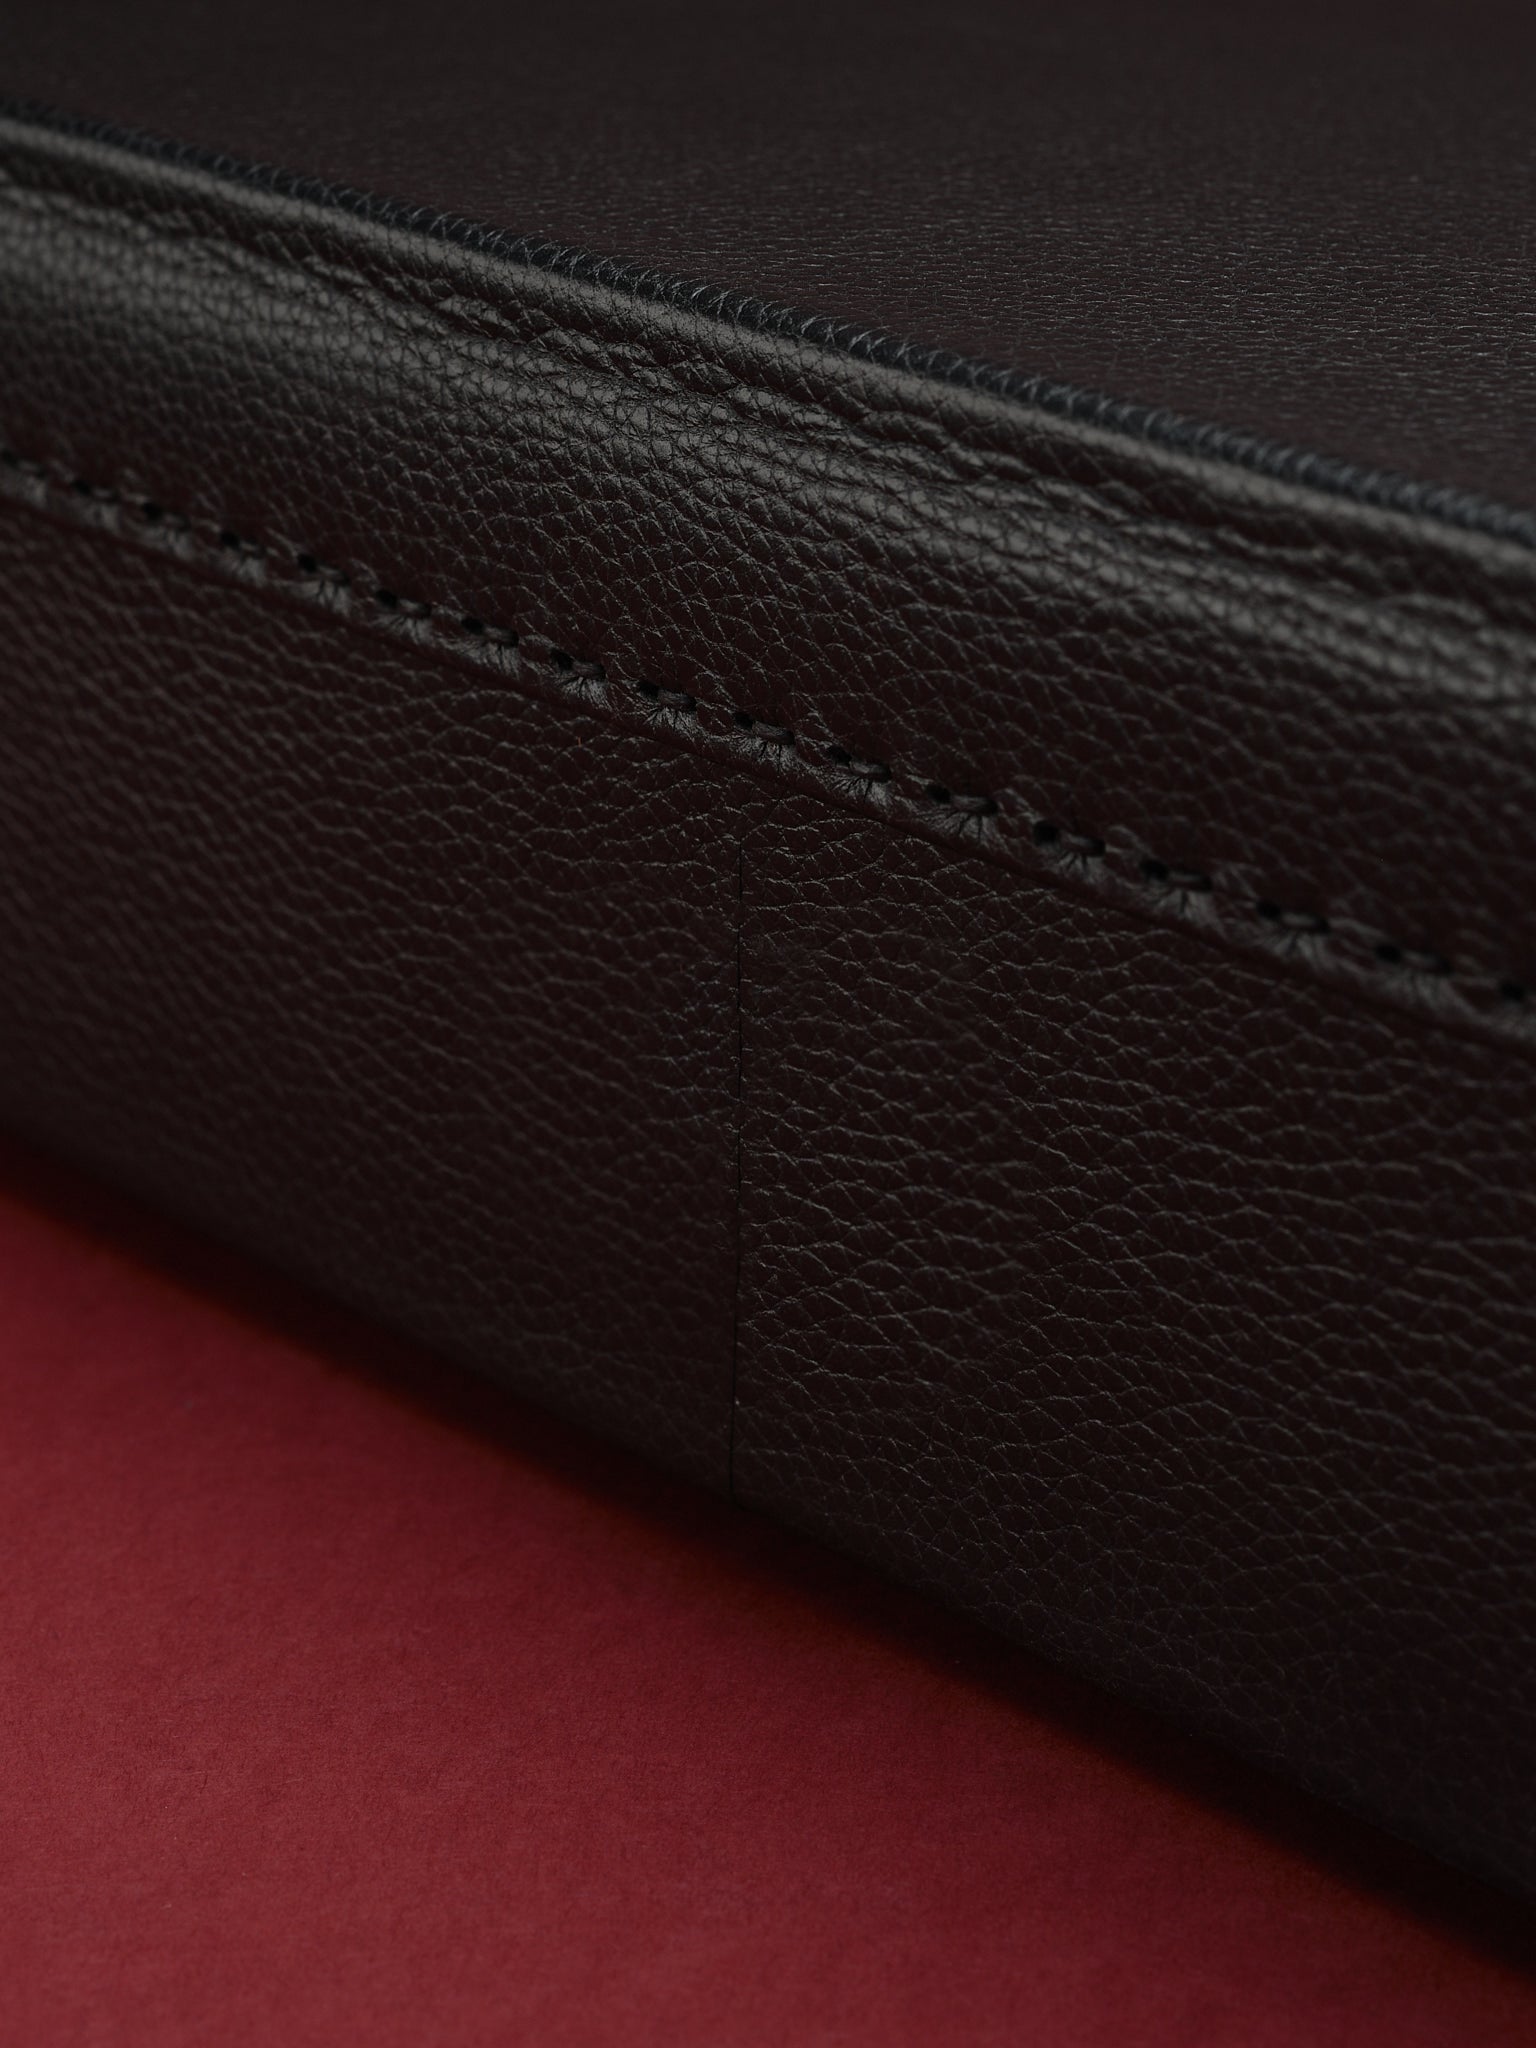 Hand-stitched Details. Storage Case for Watches Black by Capra Leather